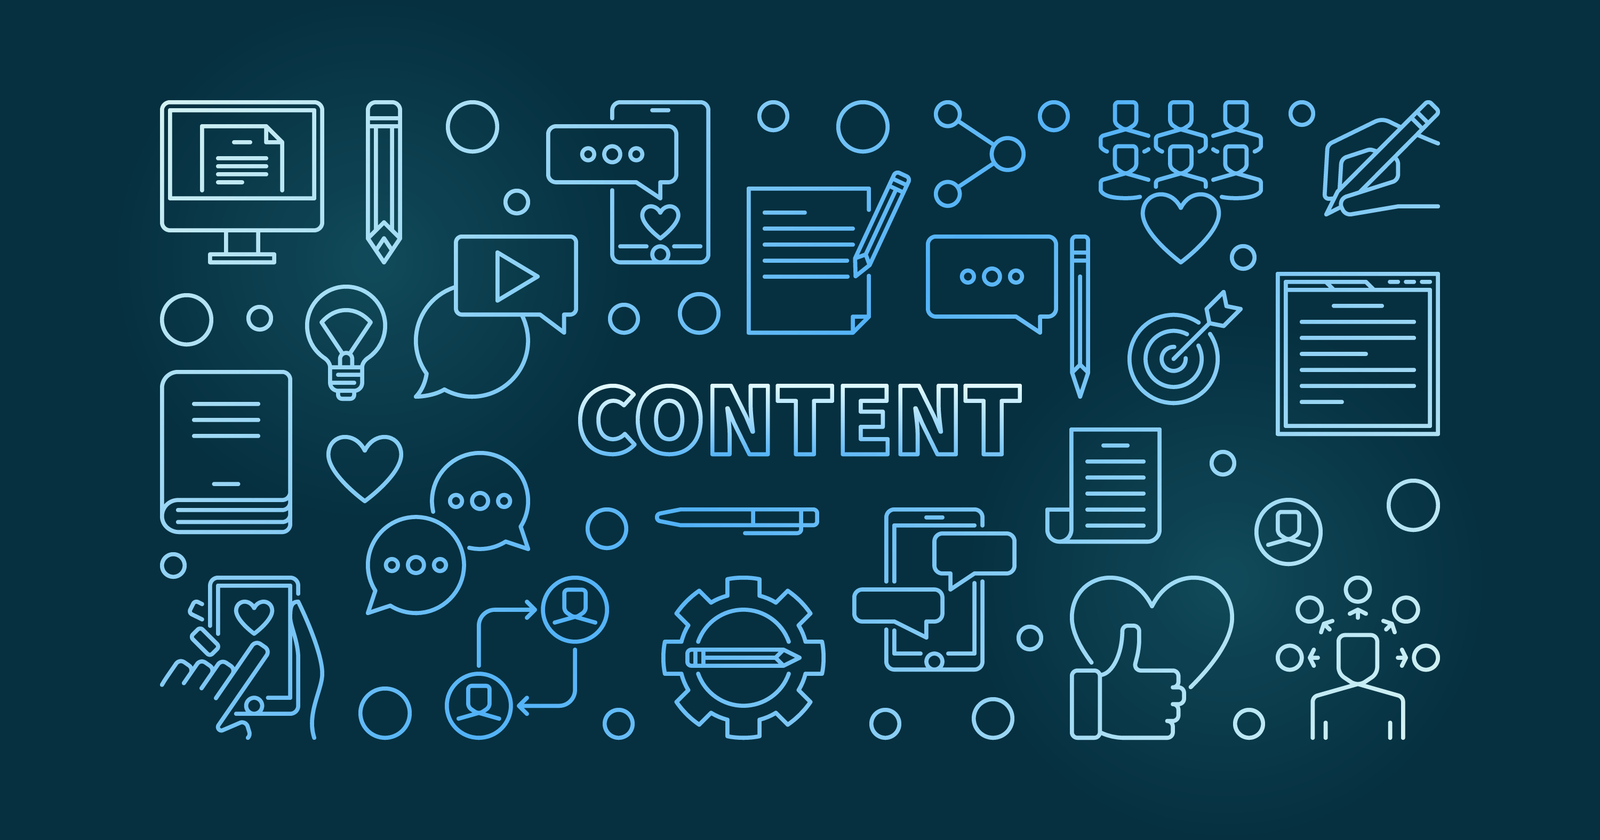 5 Foundational Elements to Consider When Mapping a Content Campaign